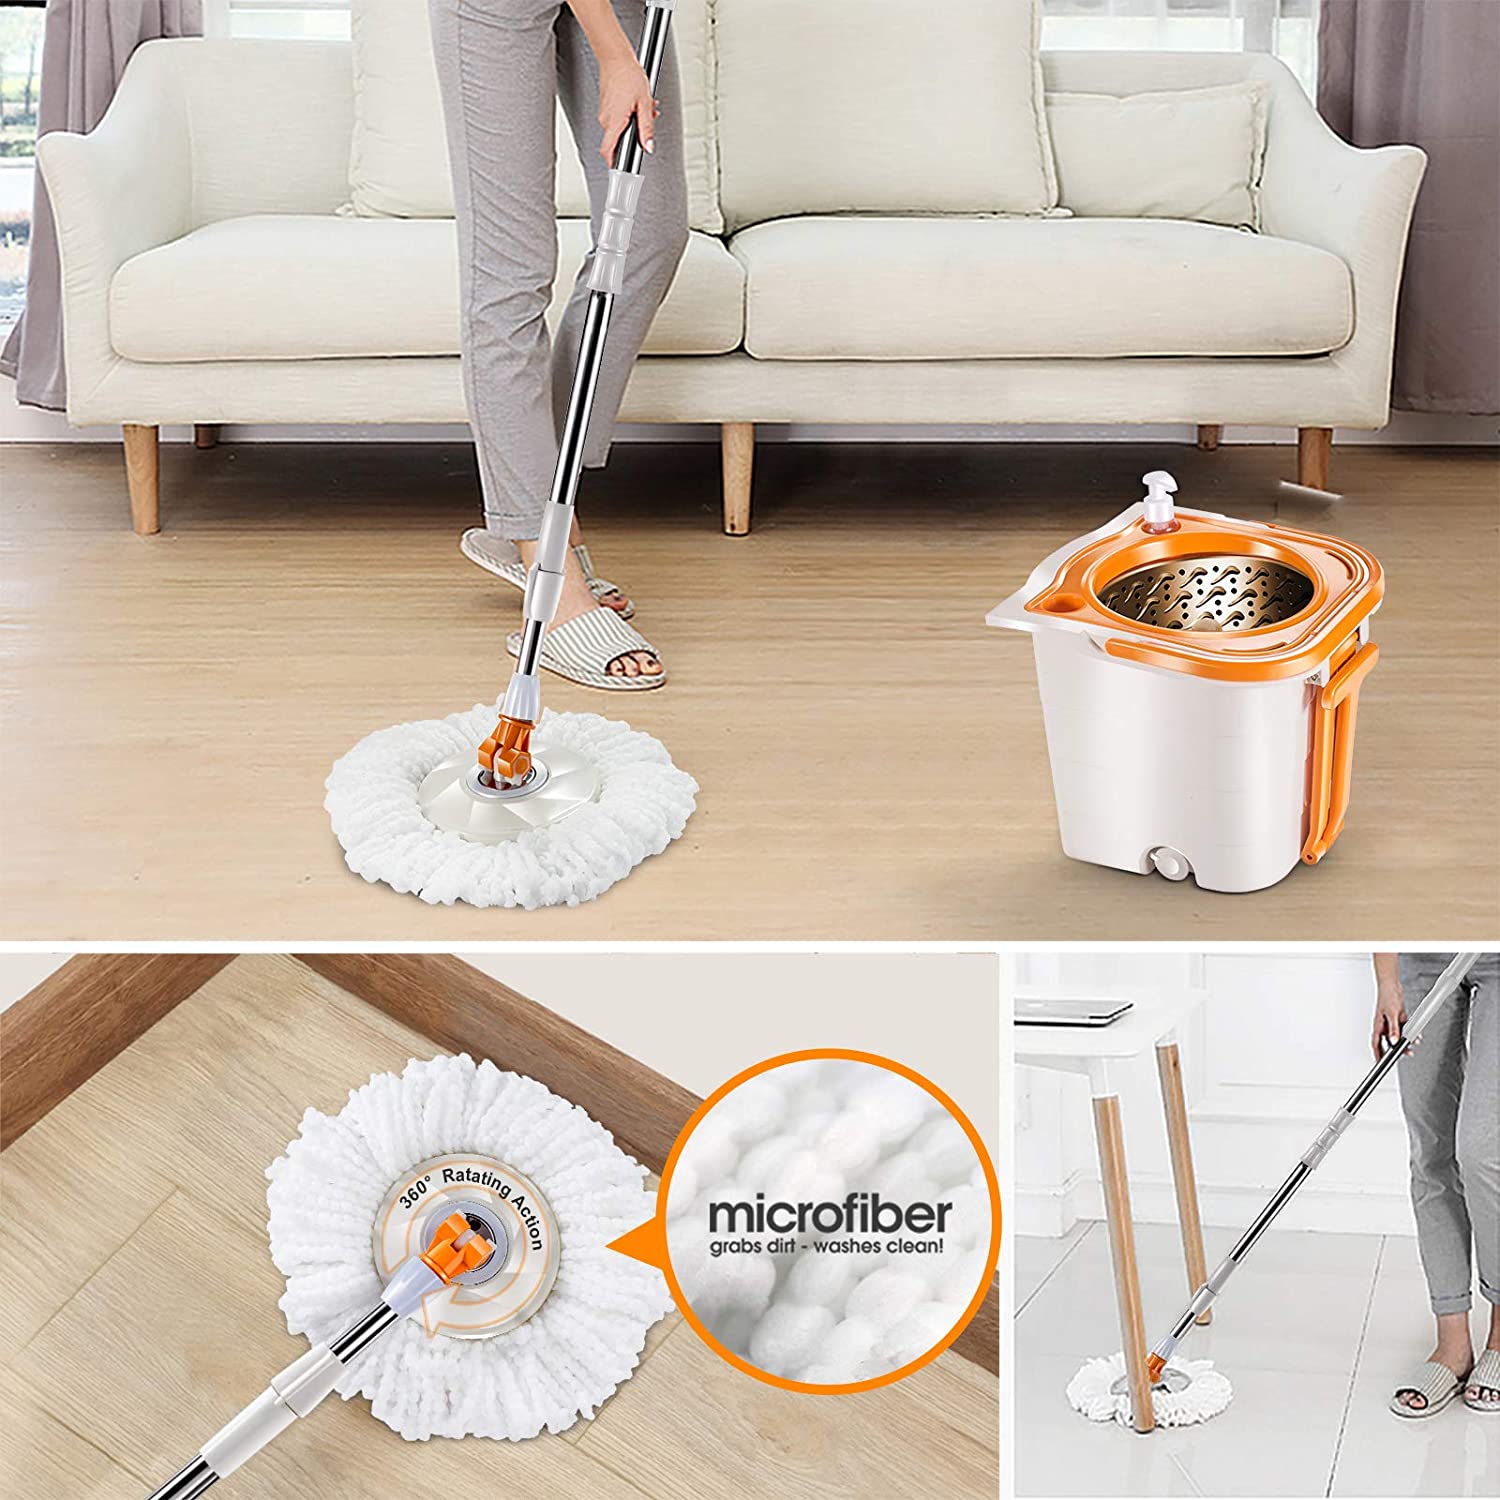 MasterTop Spin Mop Bucket System with Wringer Set - Floor Mop Stainless Steel Mop Handle, Mop Buckets Separate Clean and Dirty Water